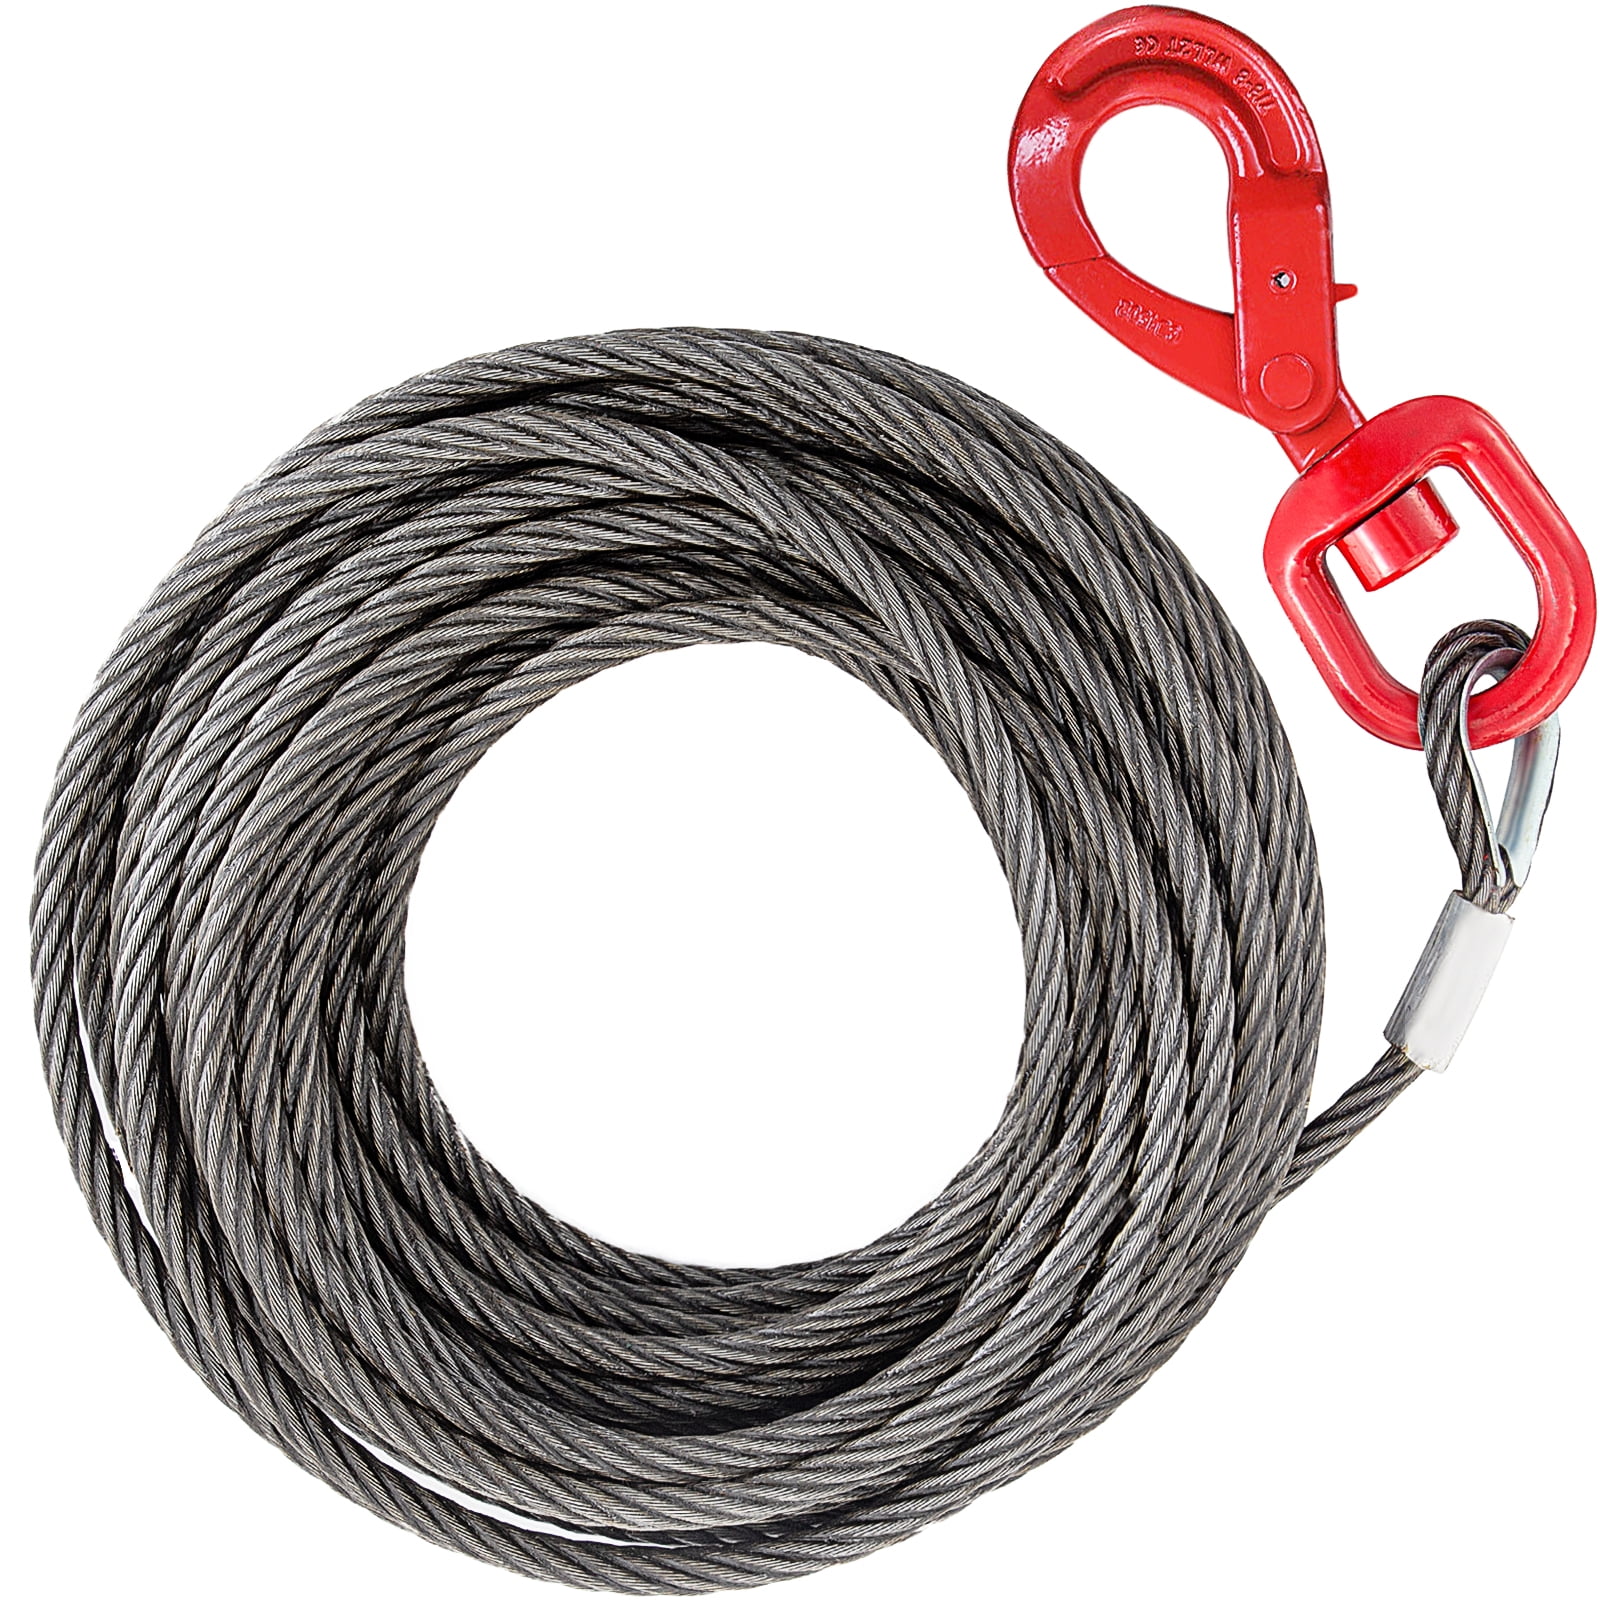 Stainless Steel Wire Rope High Strength Durable Soft Lifting Rope